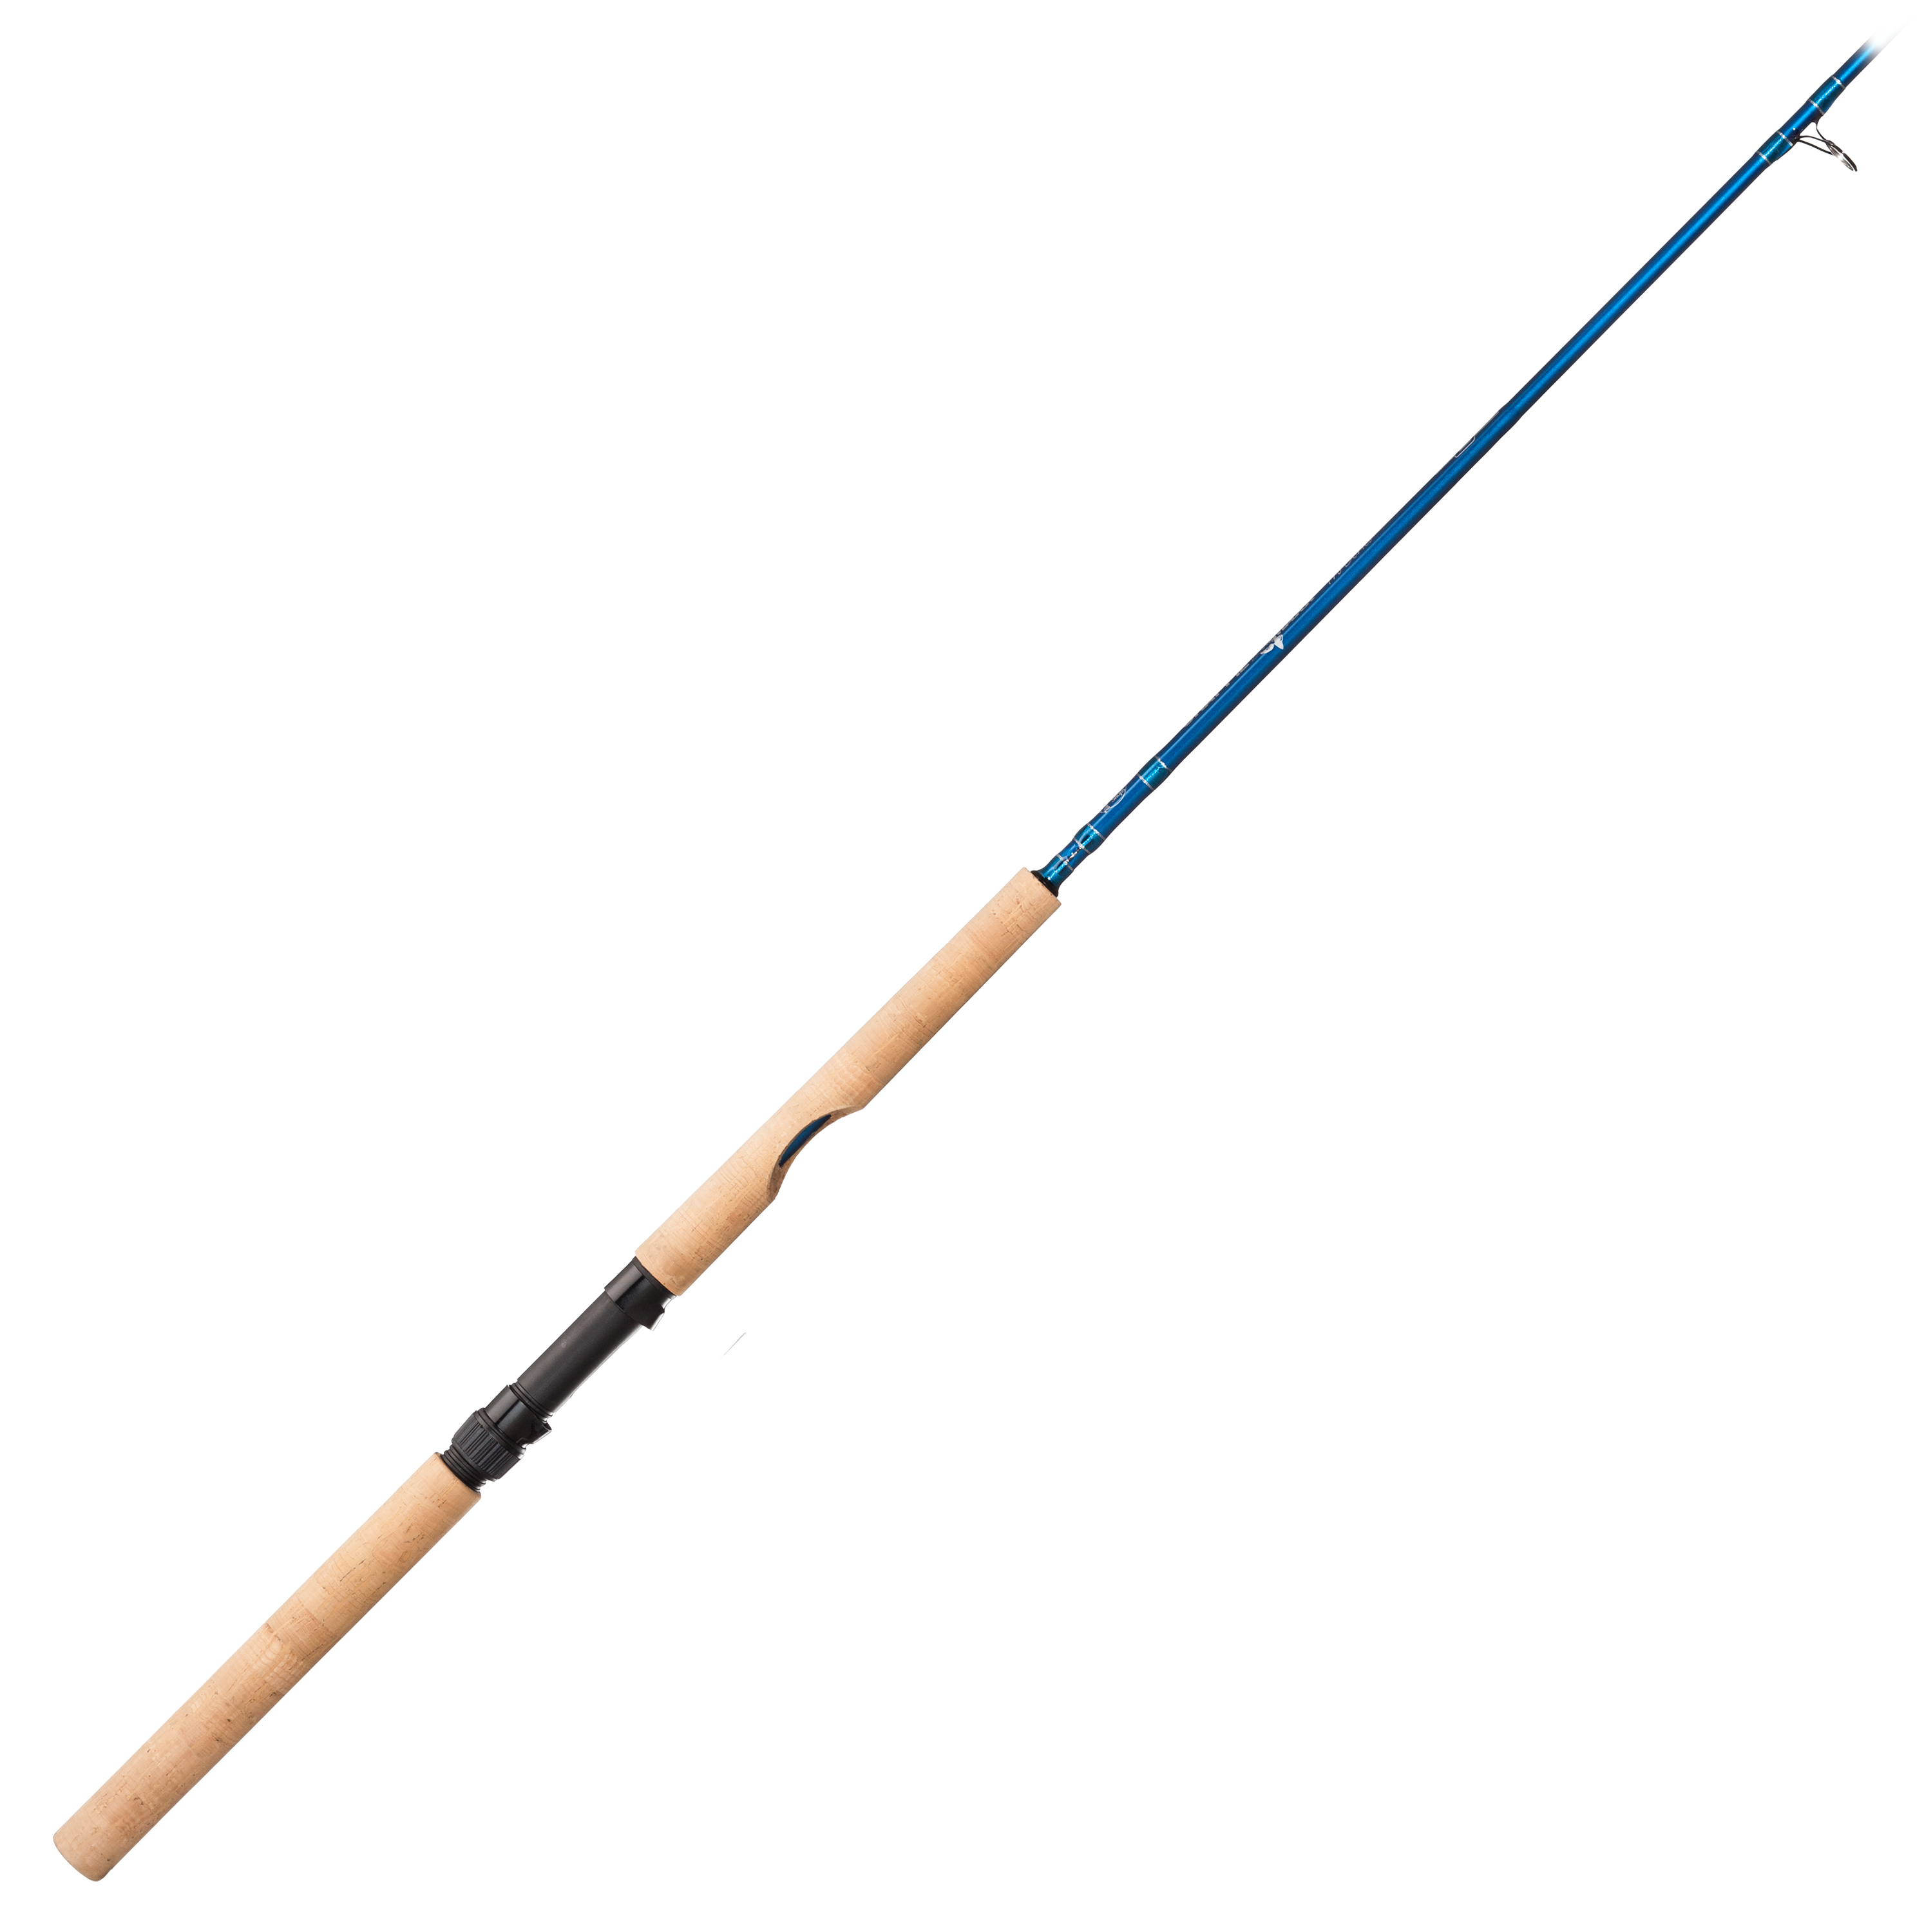 Bass Pro Shops Crappie Maxx Pro Series Crappie Rods